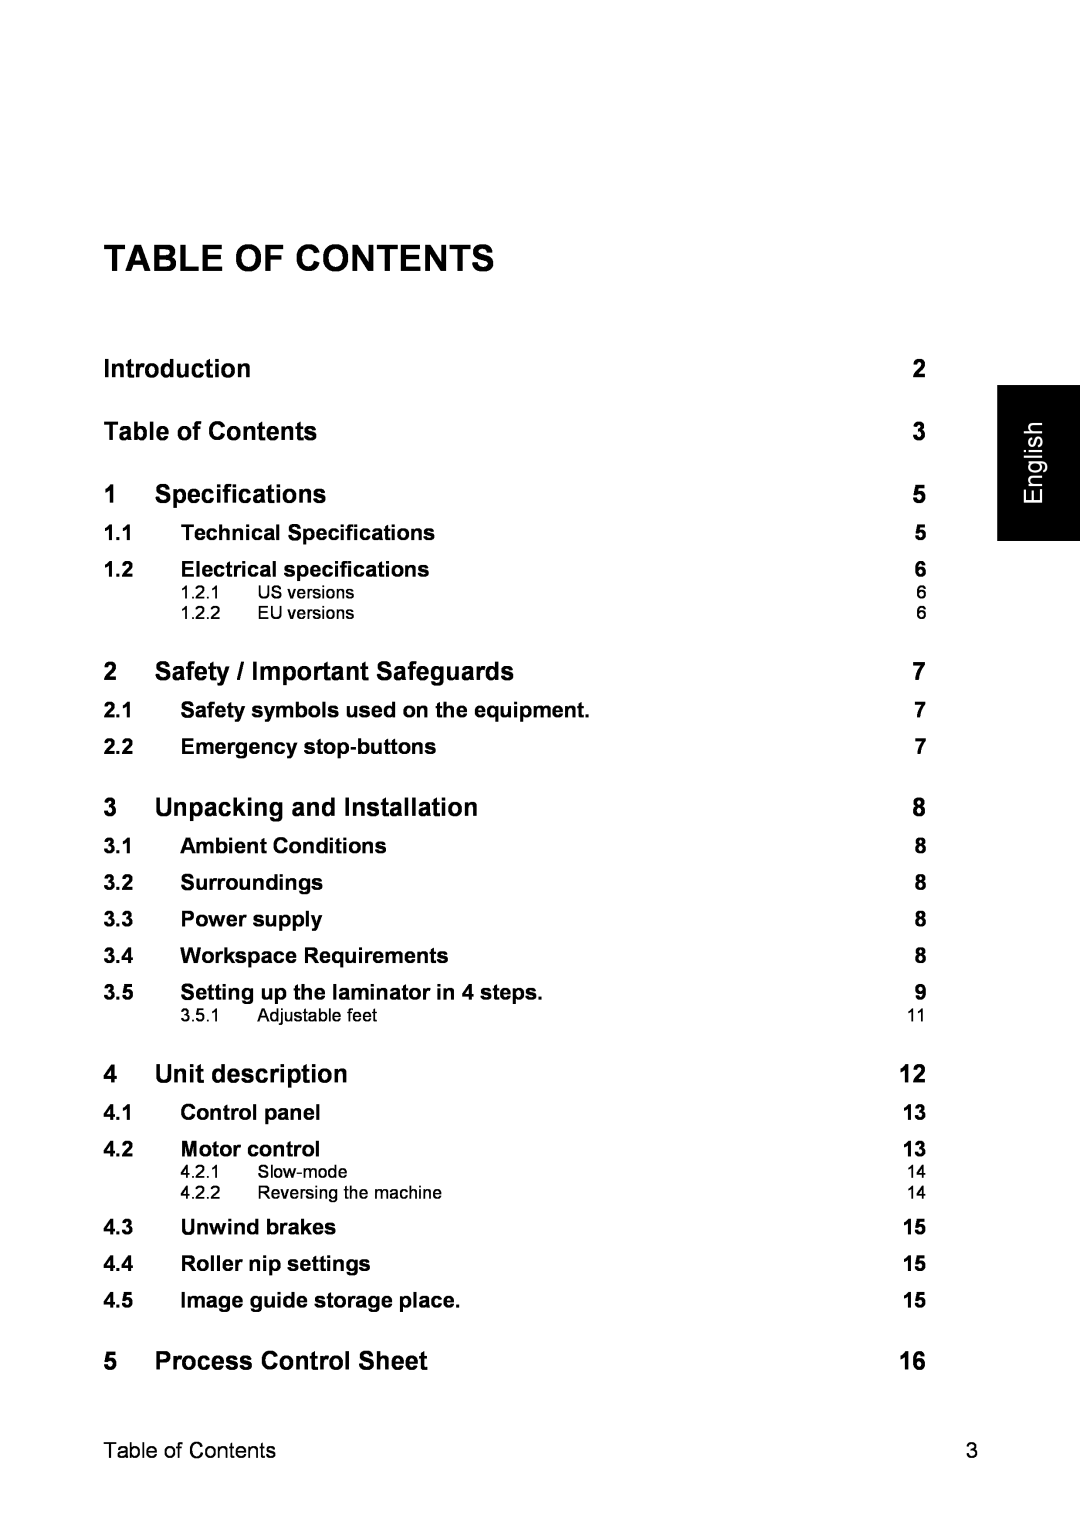 SEAL 44/62 Table Of Contents, Introduction Table of Contents 1 Specifications, Safety / Important Safeguards, English 